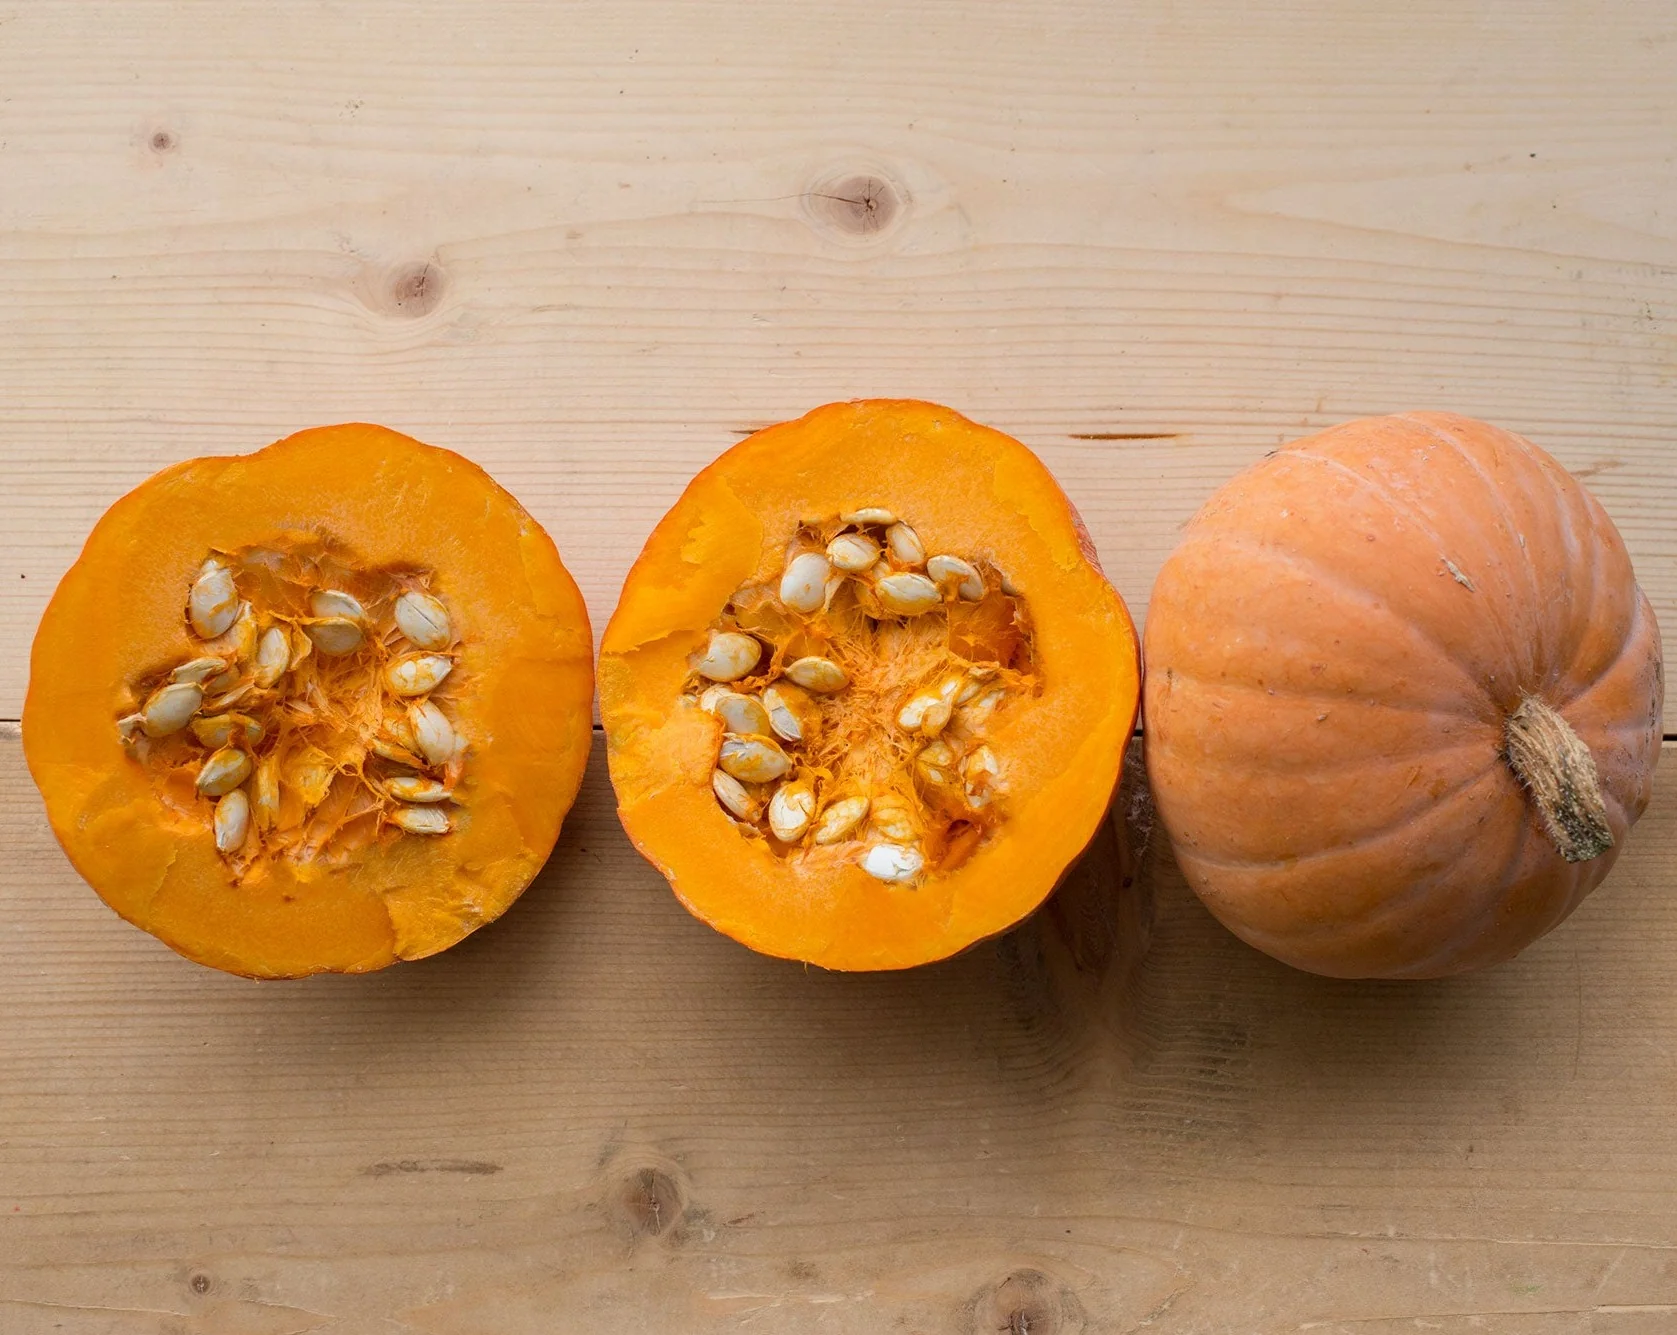 How To Save Seeds From Squash